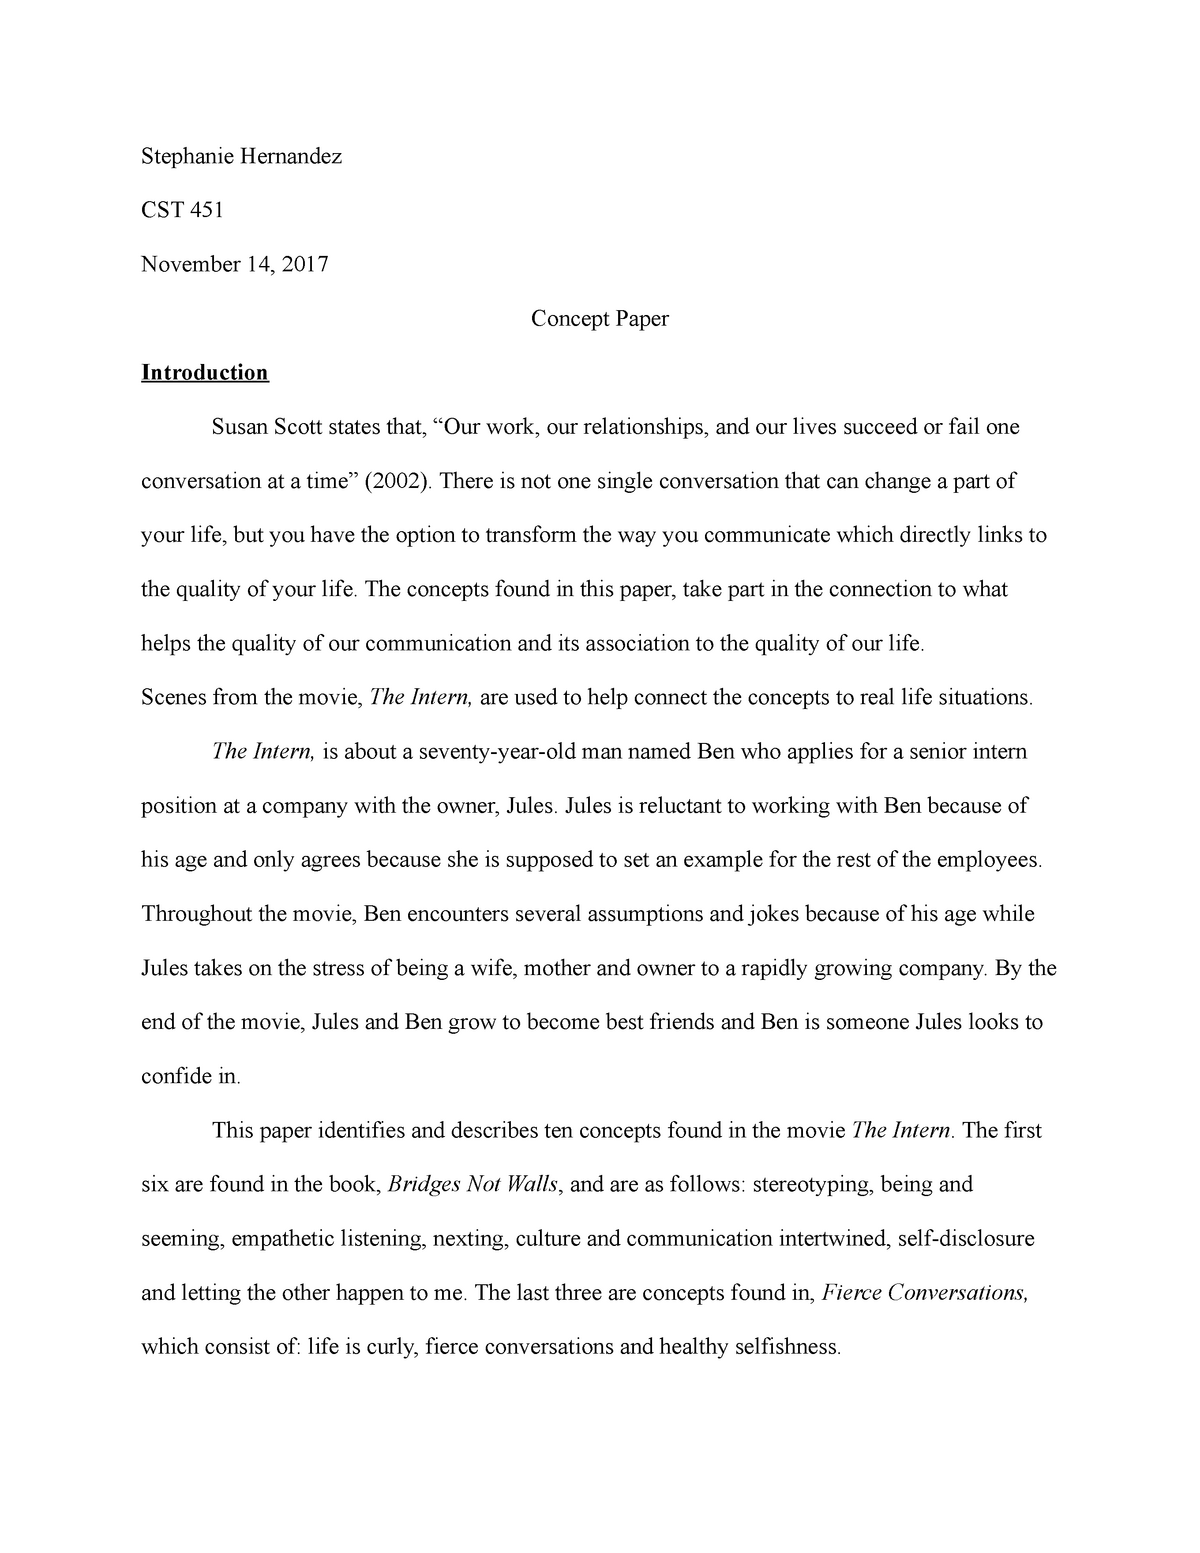 example of concept paper for project & for academic research